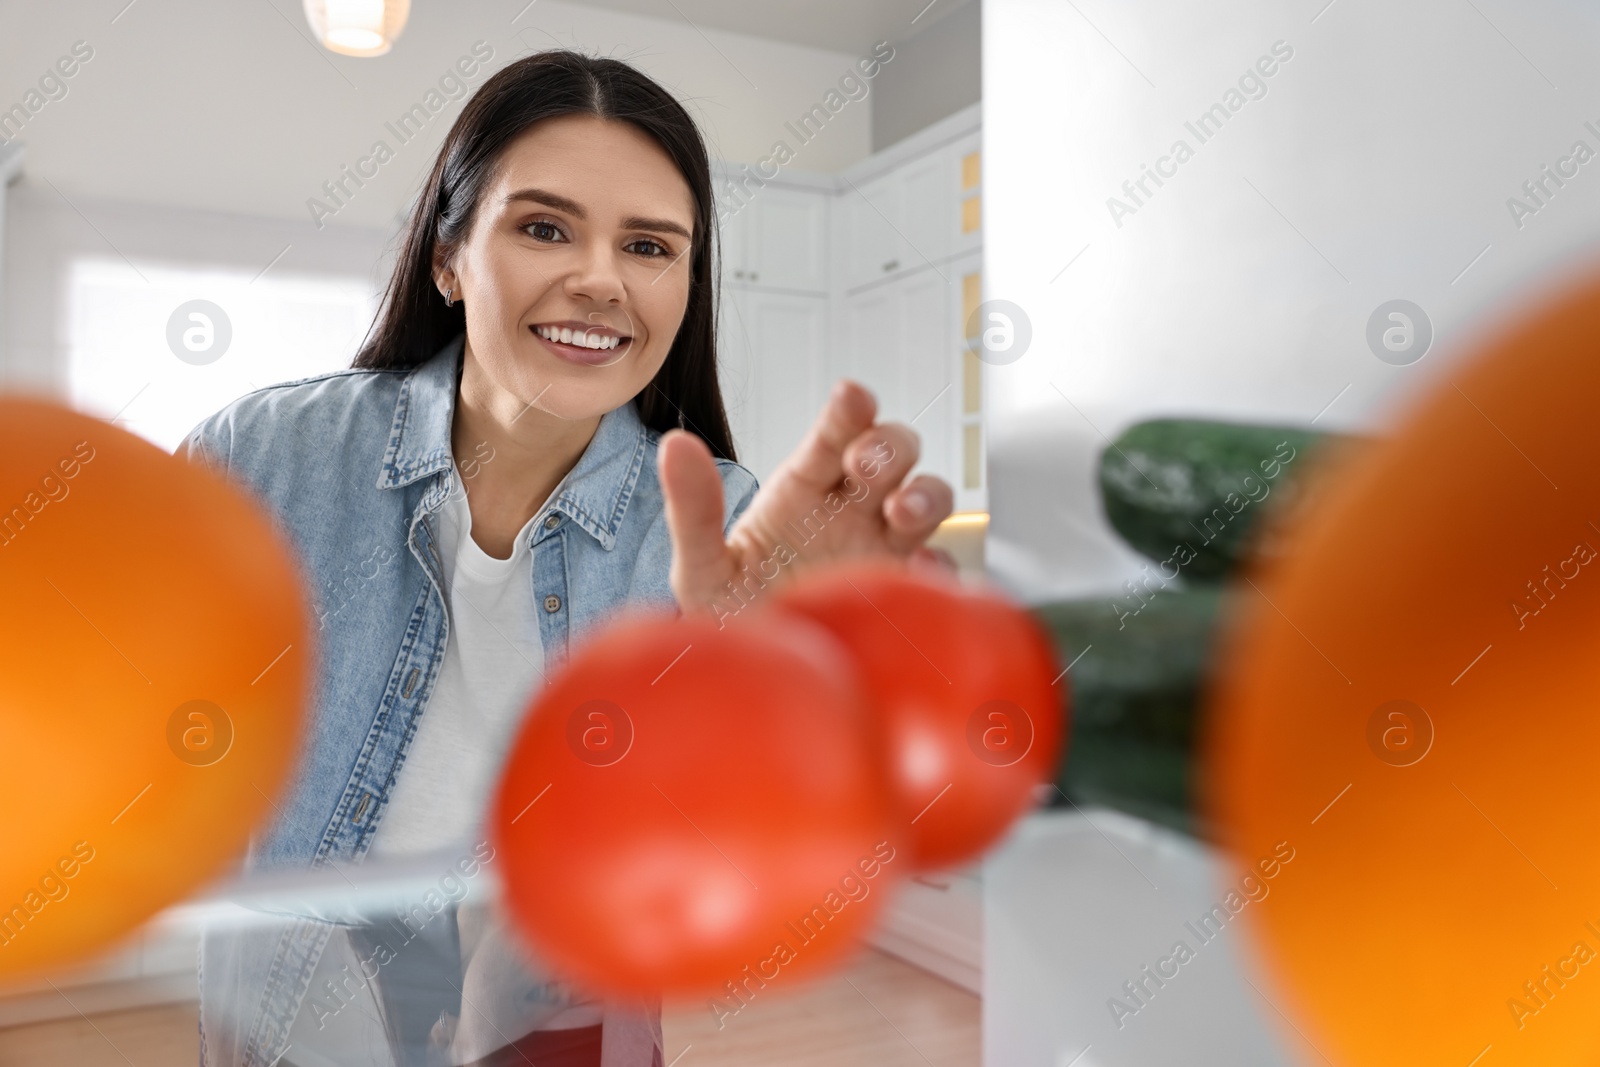 Photo of Thoughtful woman near refrigerator in kitchen, view from inside